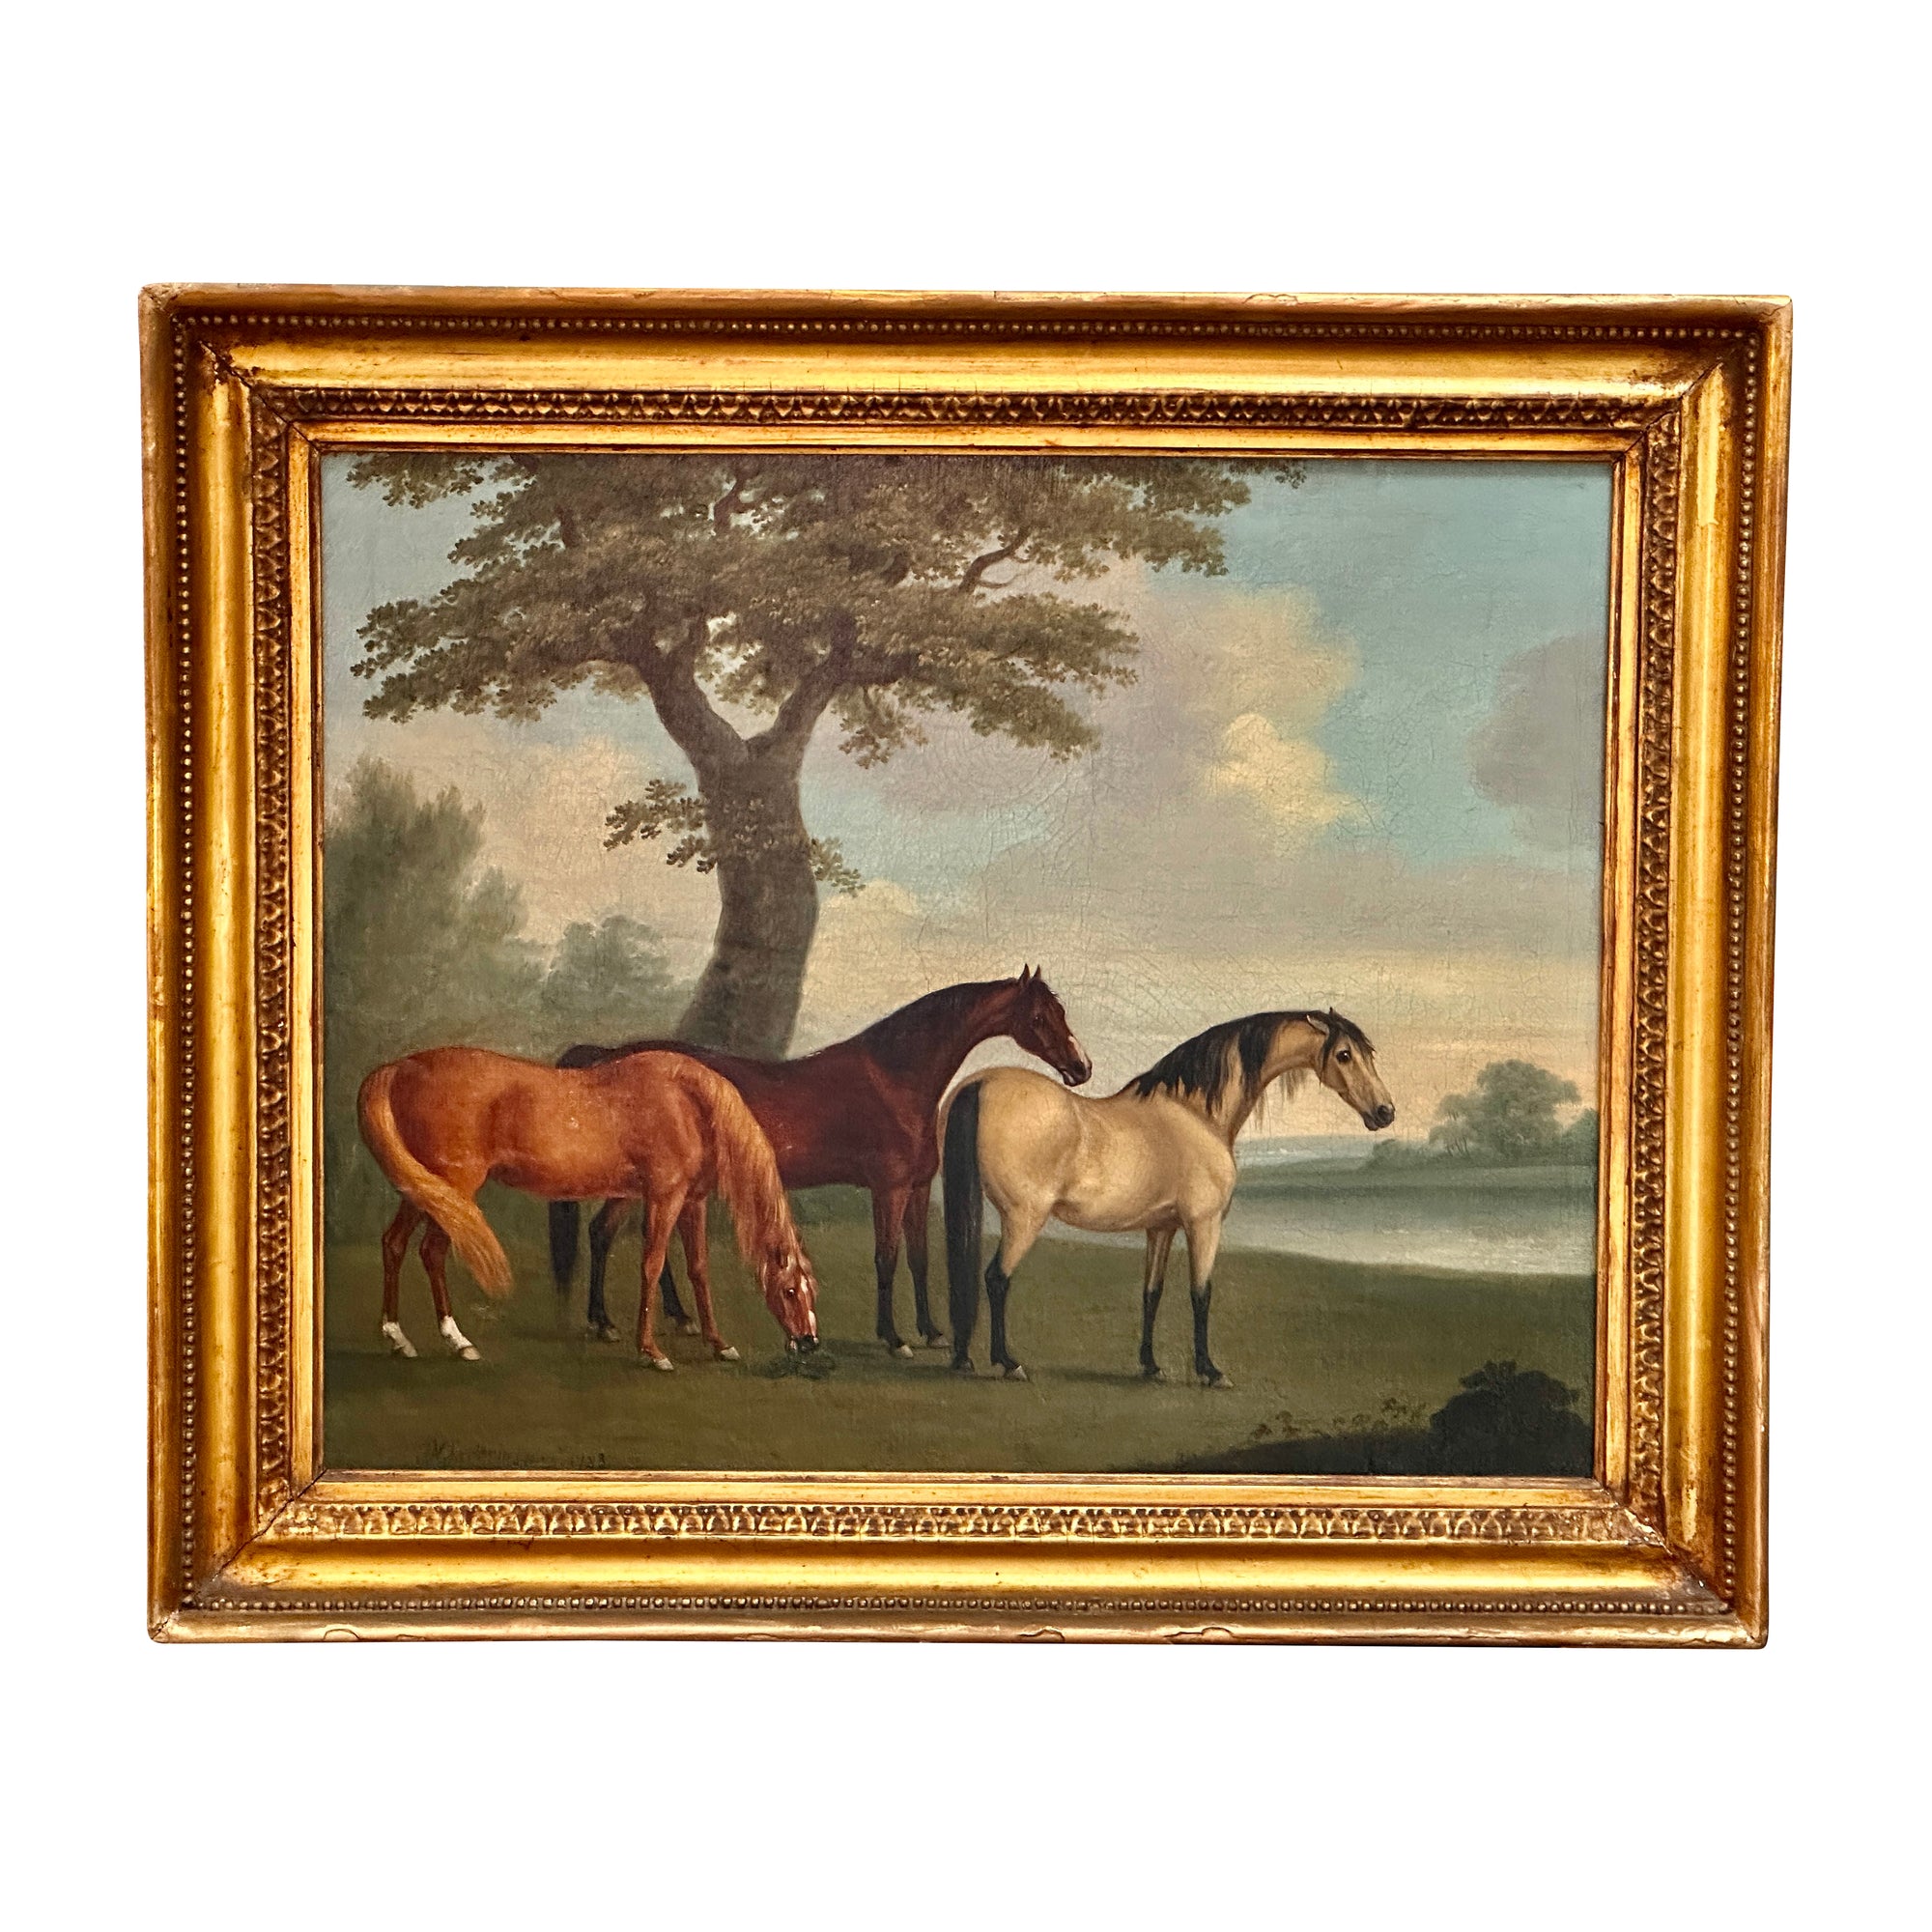 Sartorious, Three Horses Oil on Canvas, Signed (1759-1828)